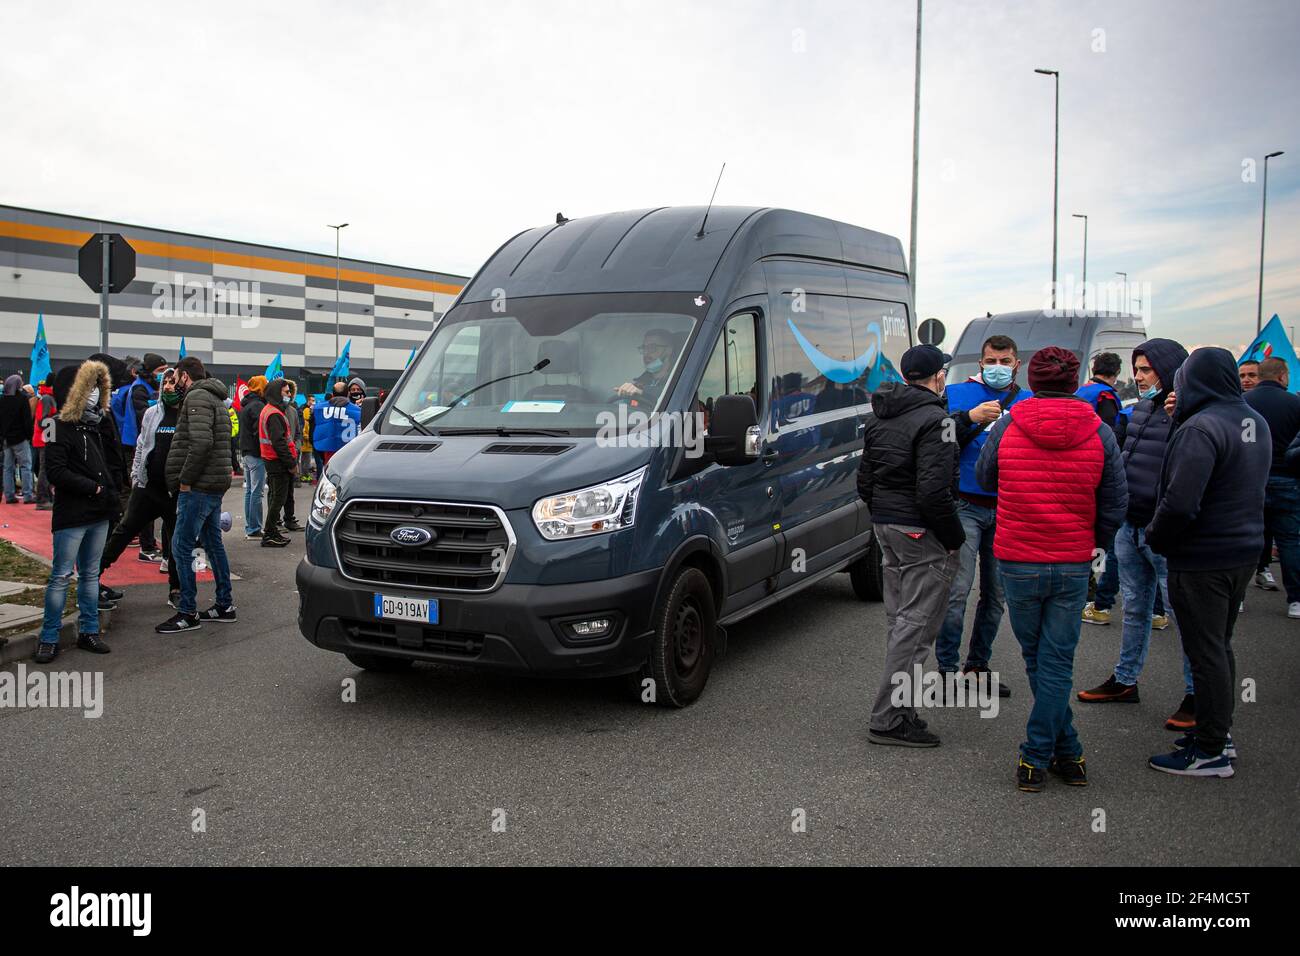 Brandizzo, Italy - 22 March, 2021: A delivery truck passes close to demonstrators during a demonstration for better working conditions in front of the Amazon distribution centre in Brandizzo. Trade unions said that 9,500 warehouse workers and 15,000 drivers were on strike in Italy. Credit: Nicolò Campo/Alamy Live News Stock Photo